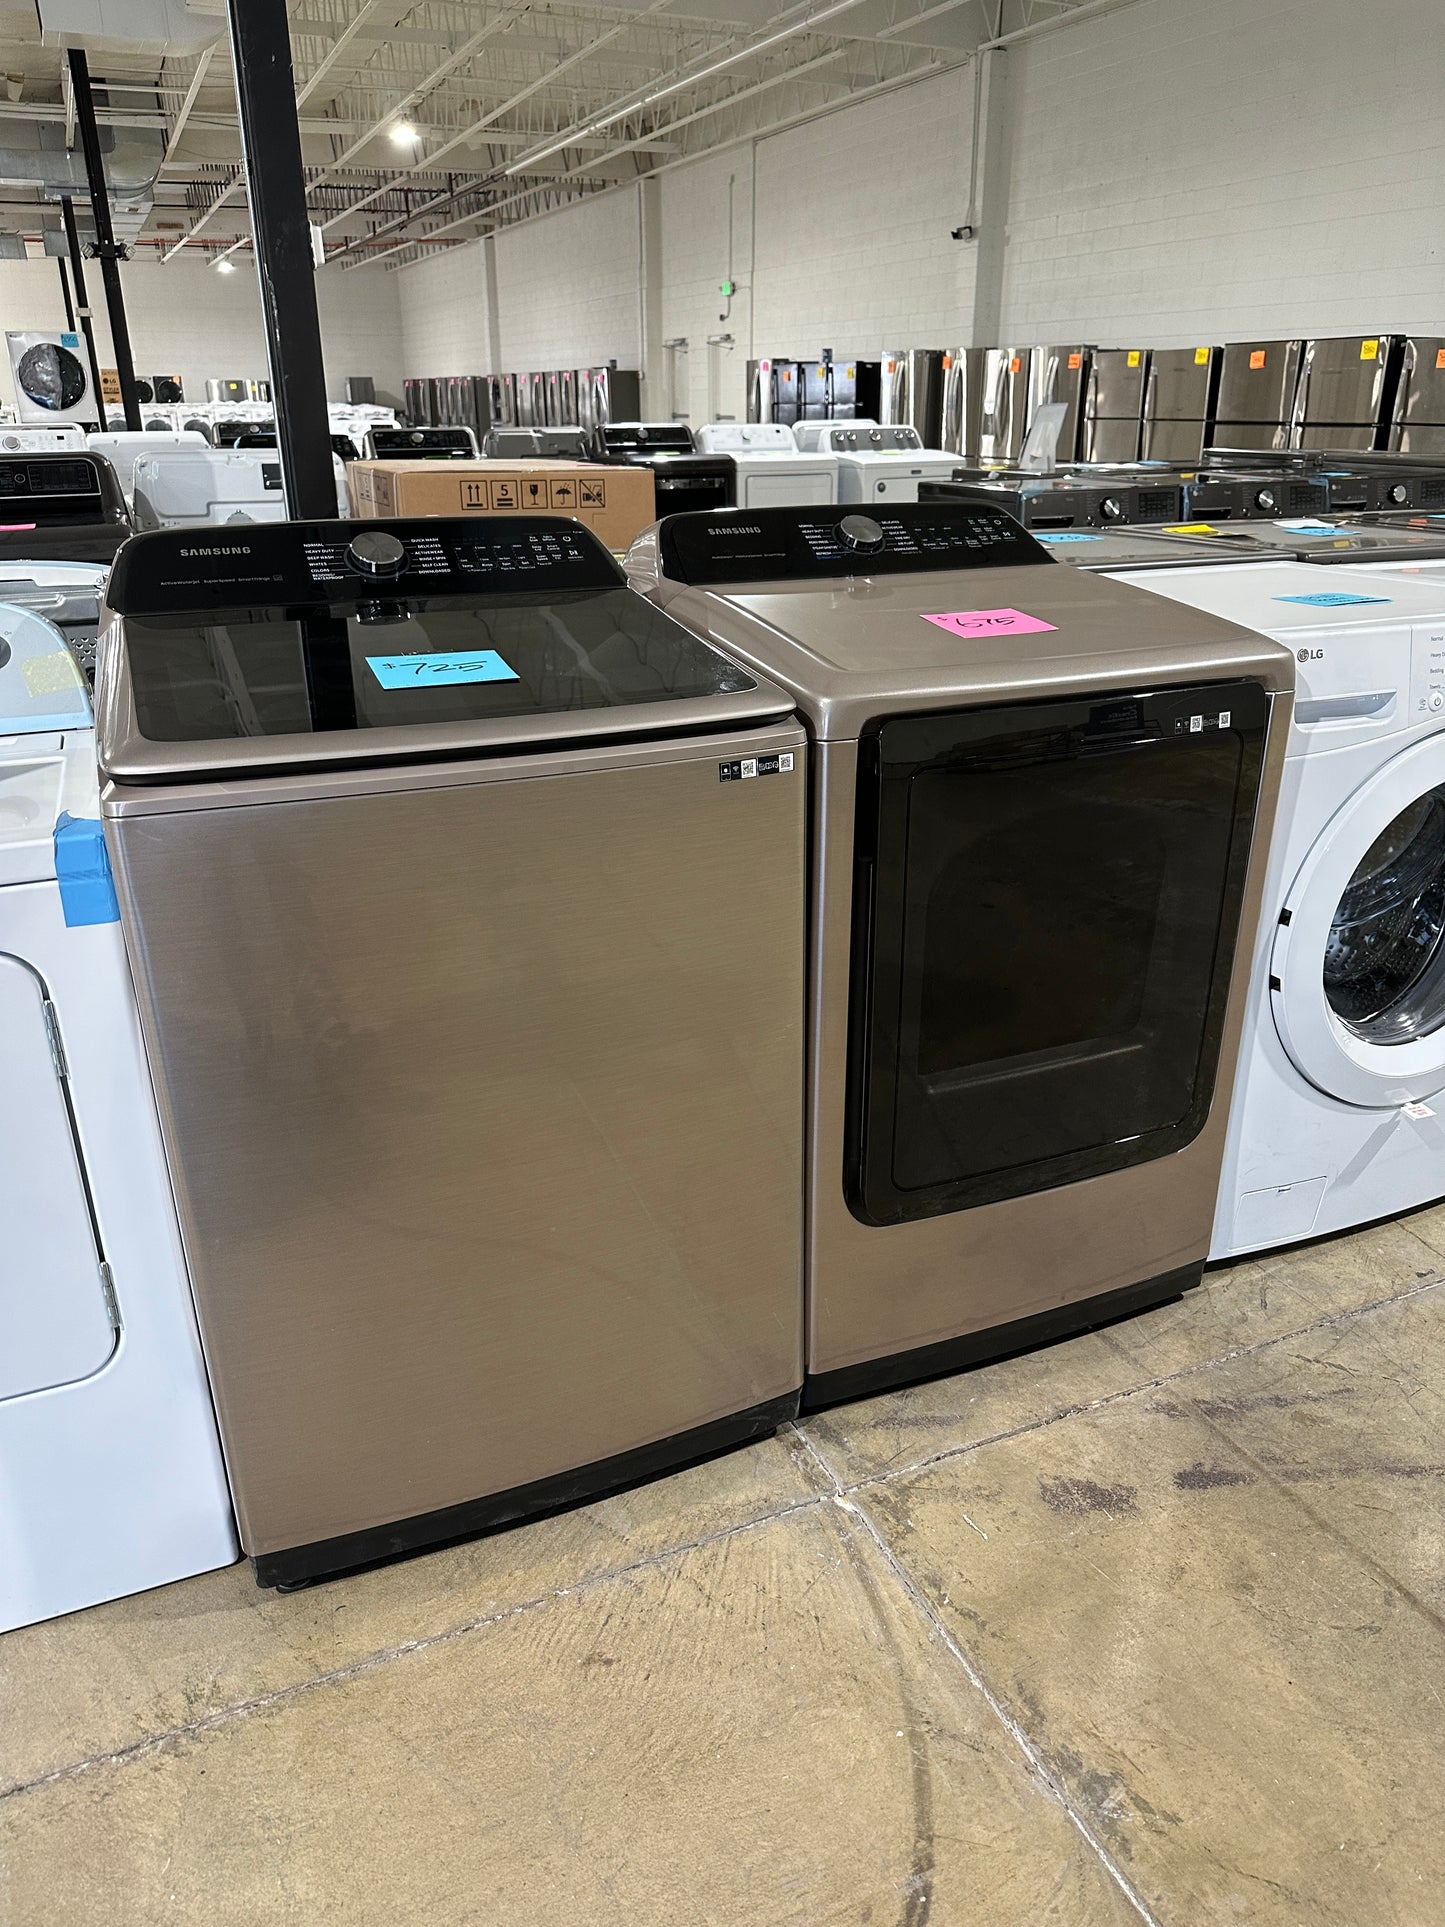 GORGEOUS NEW SAMSUNG TOP LOAD WASHER ELECTRIC DRYER SET - WAS11843S